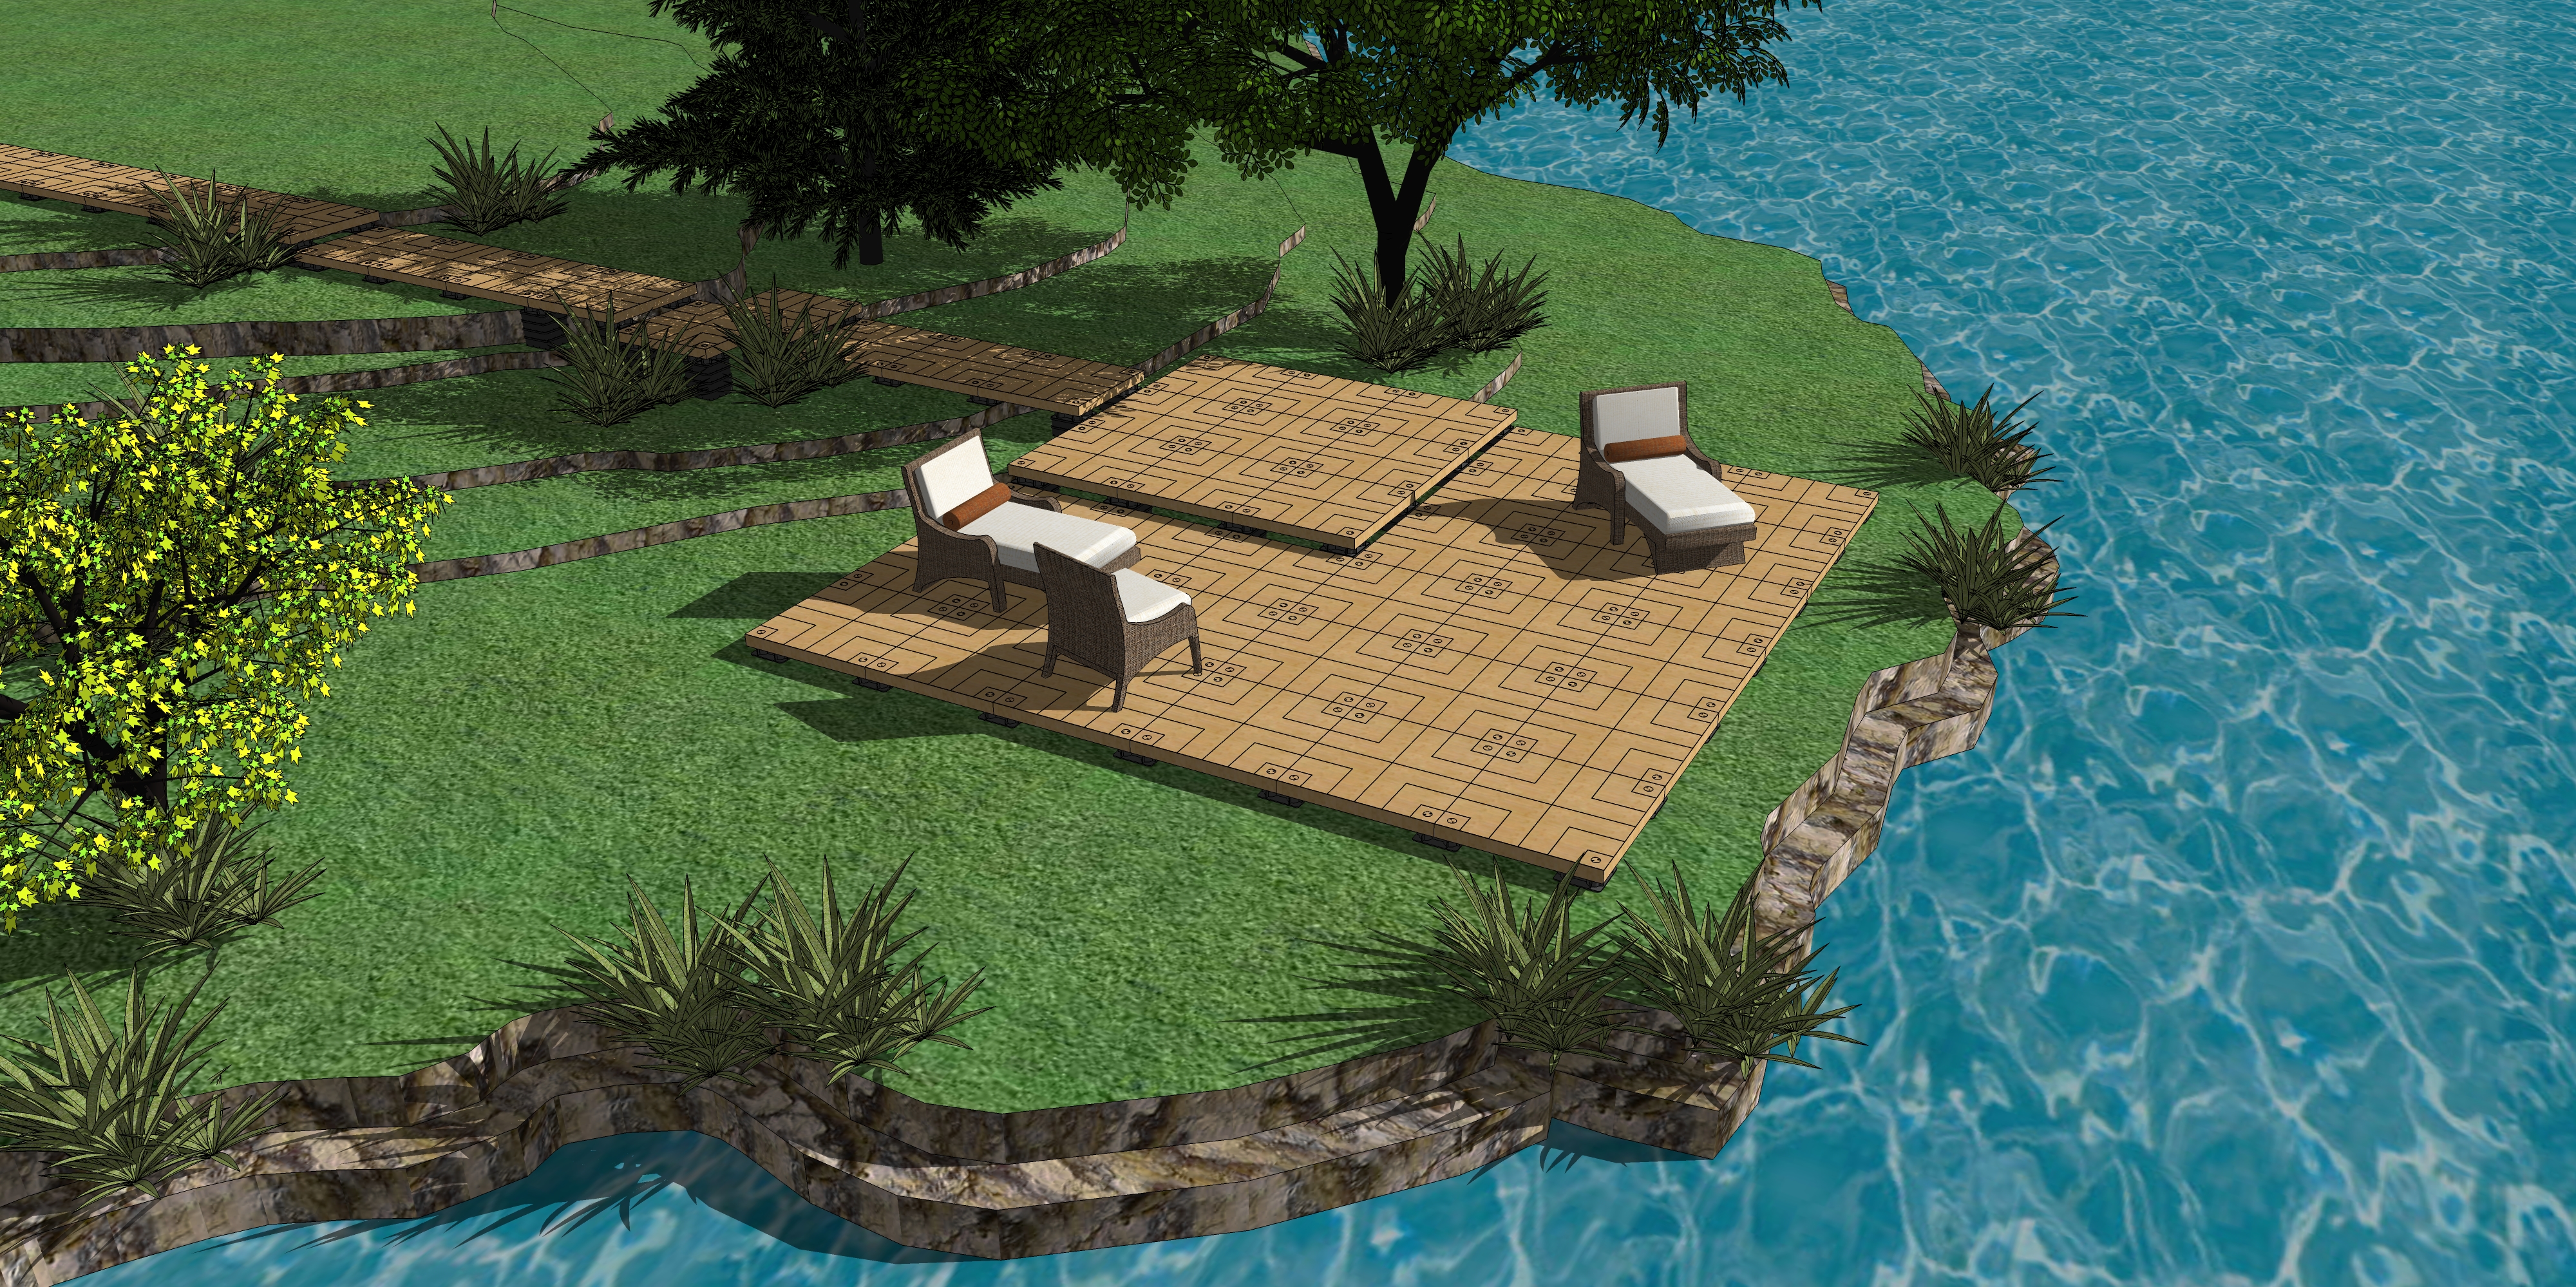 Decks and platforms for cottages and waterfronts